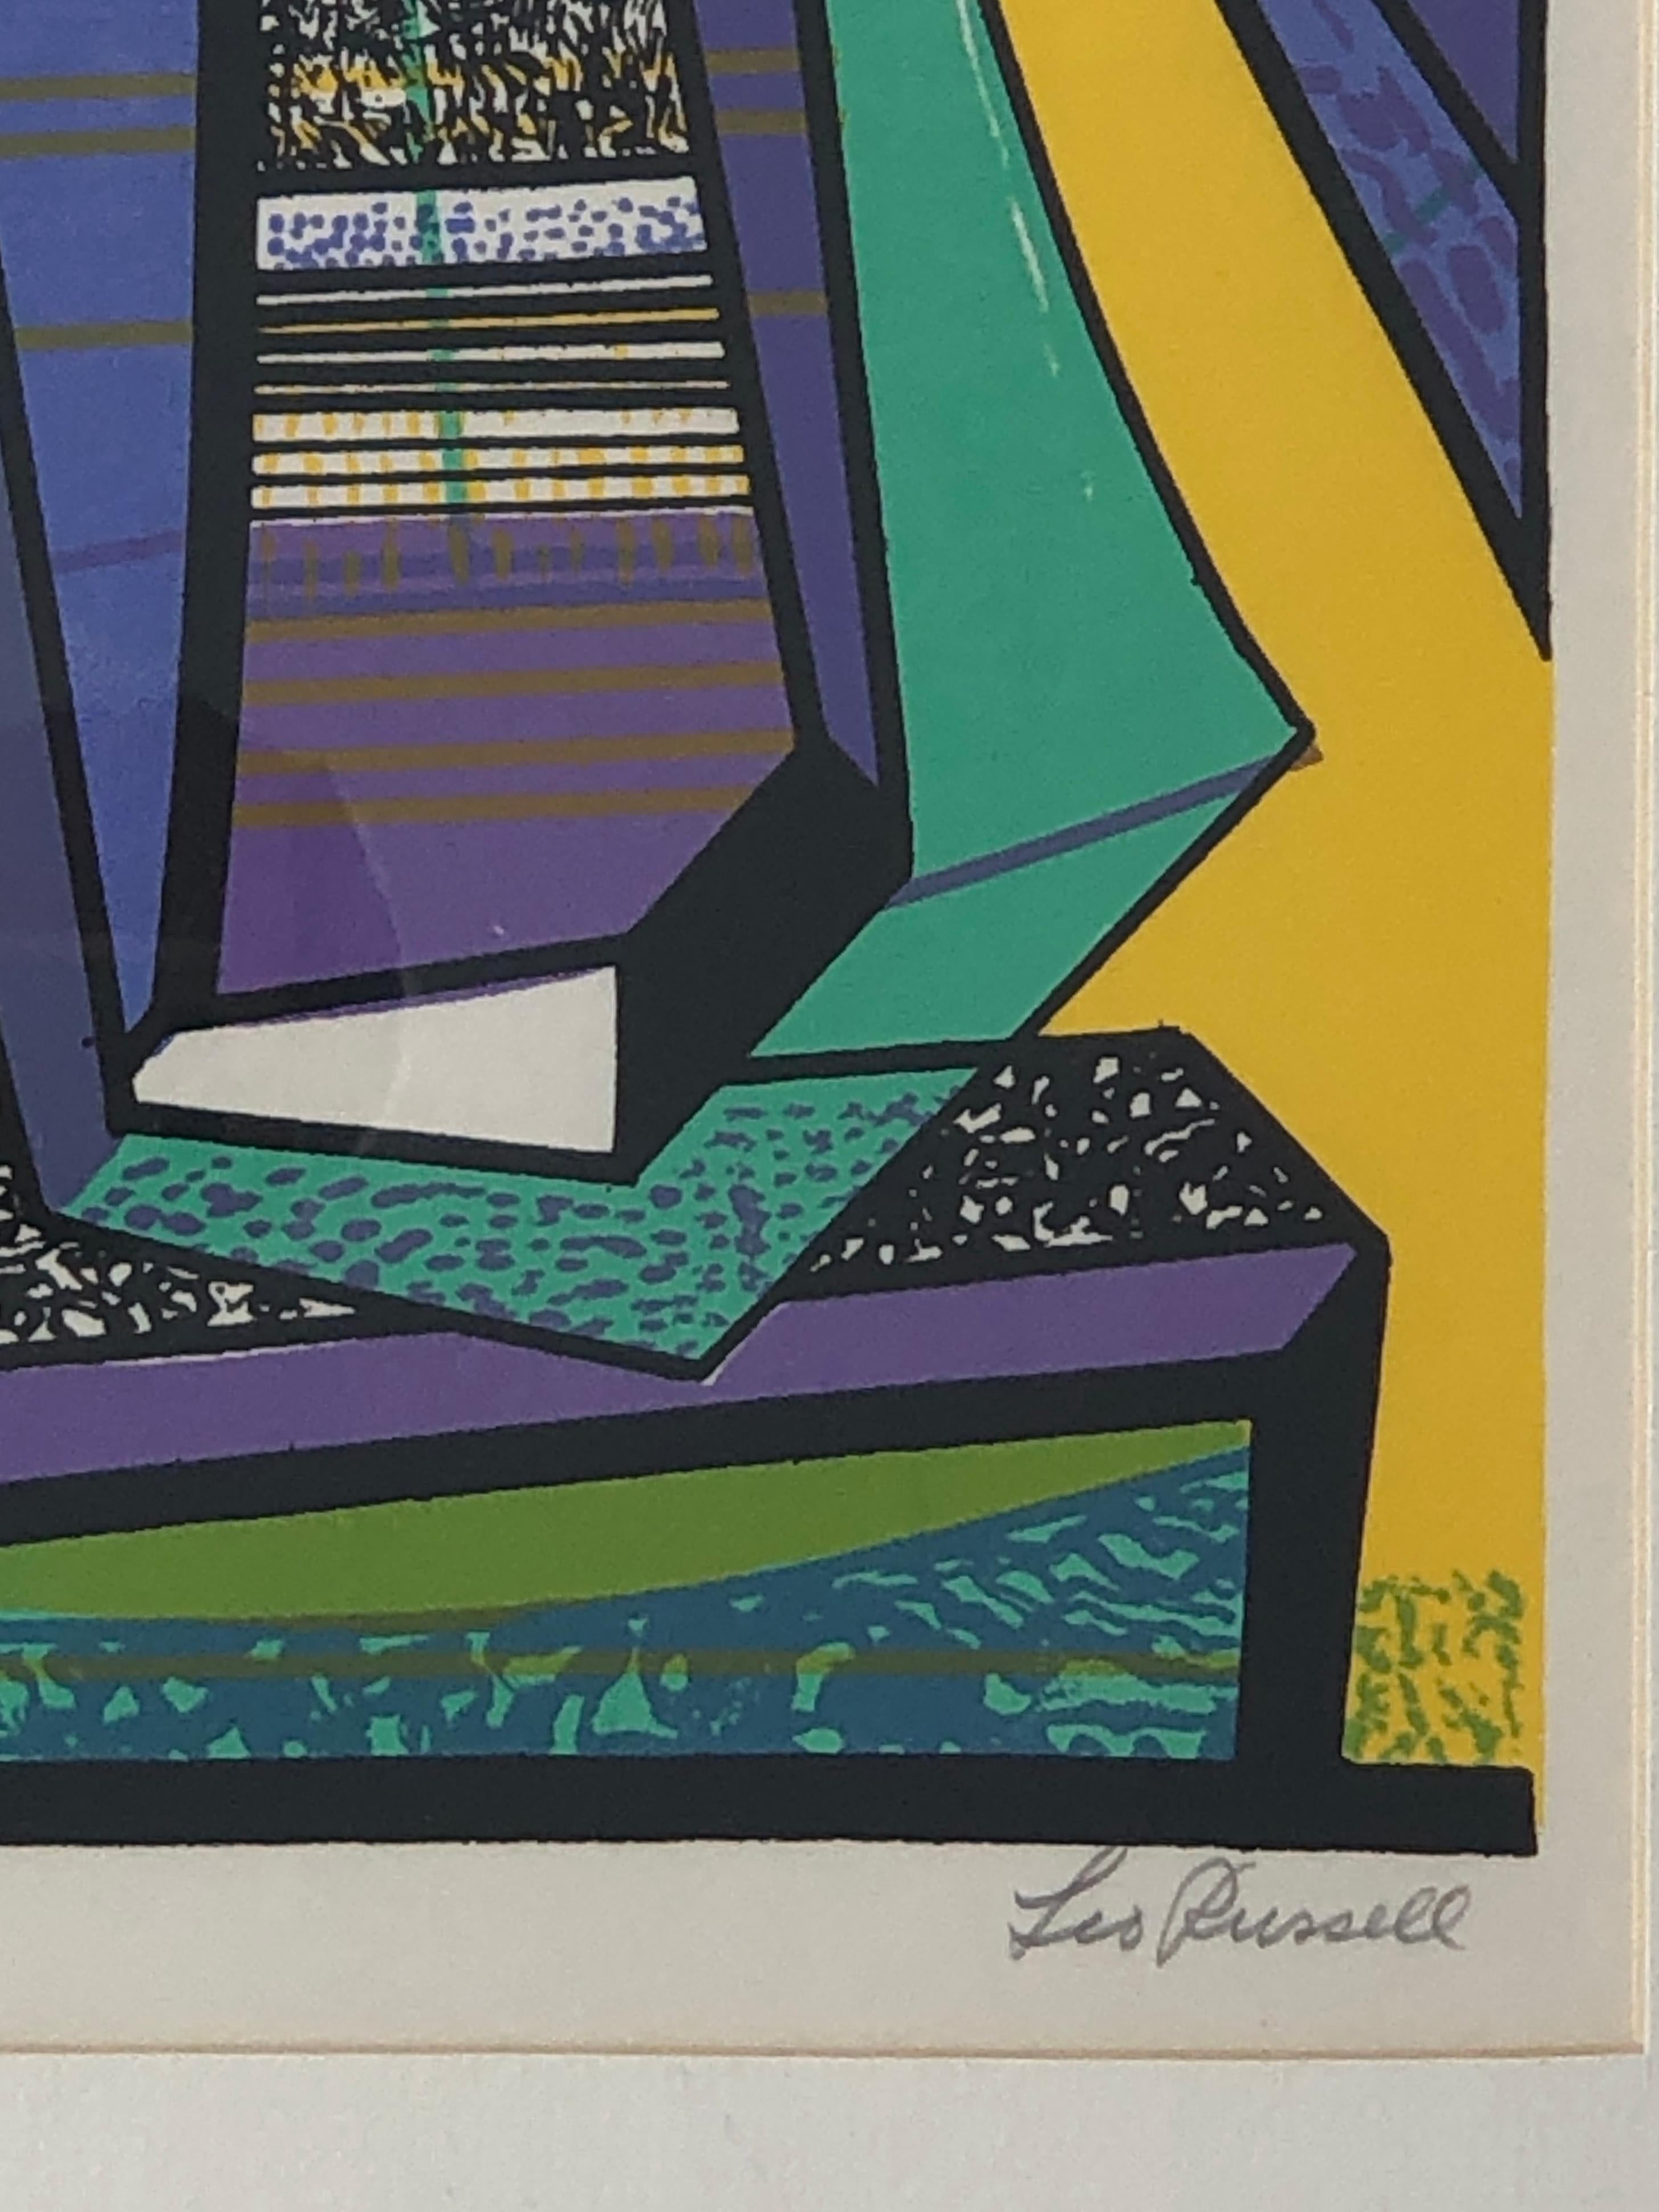 Abstract Modernist Leo Russell Graphic Print in Yellow, Purple, Black and Gray For Sale 2